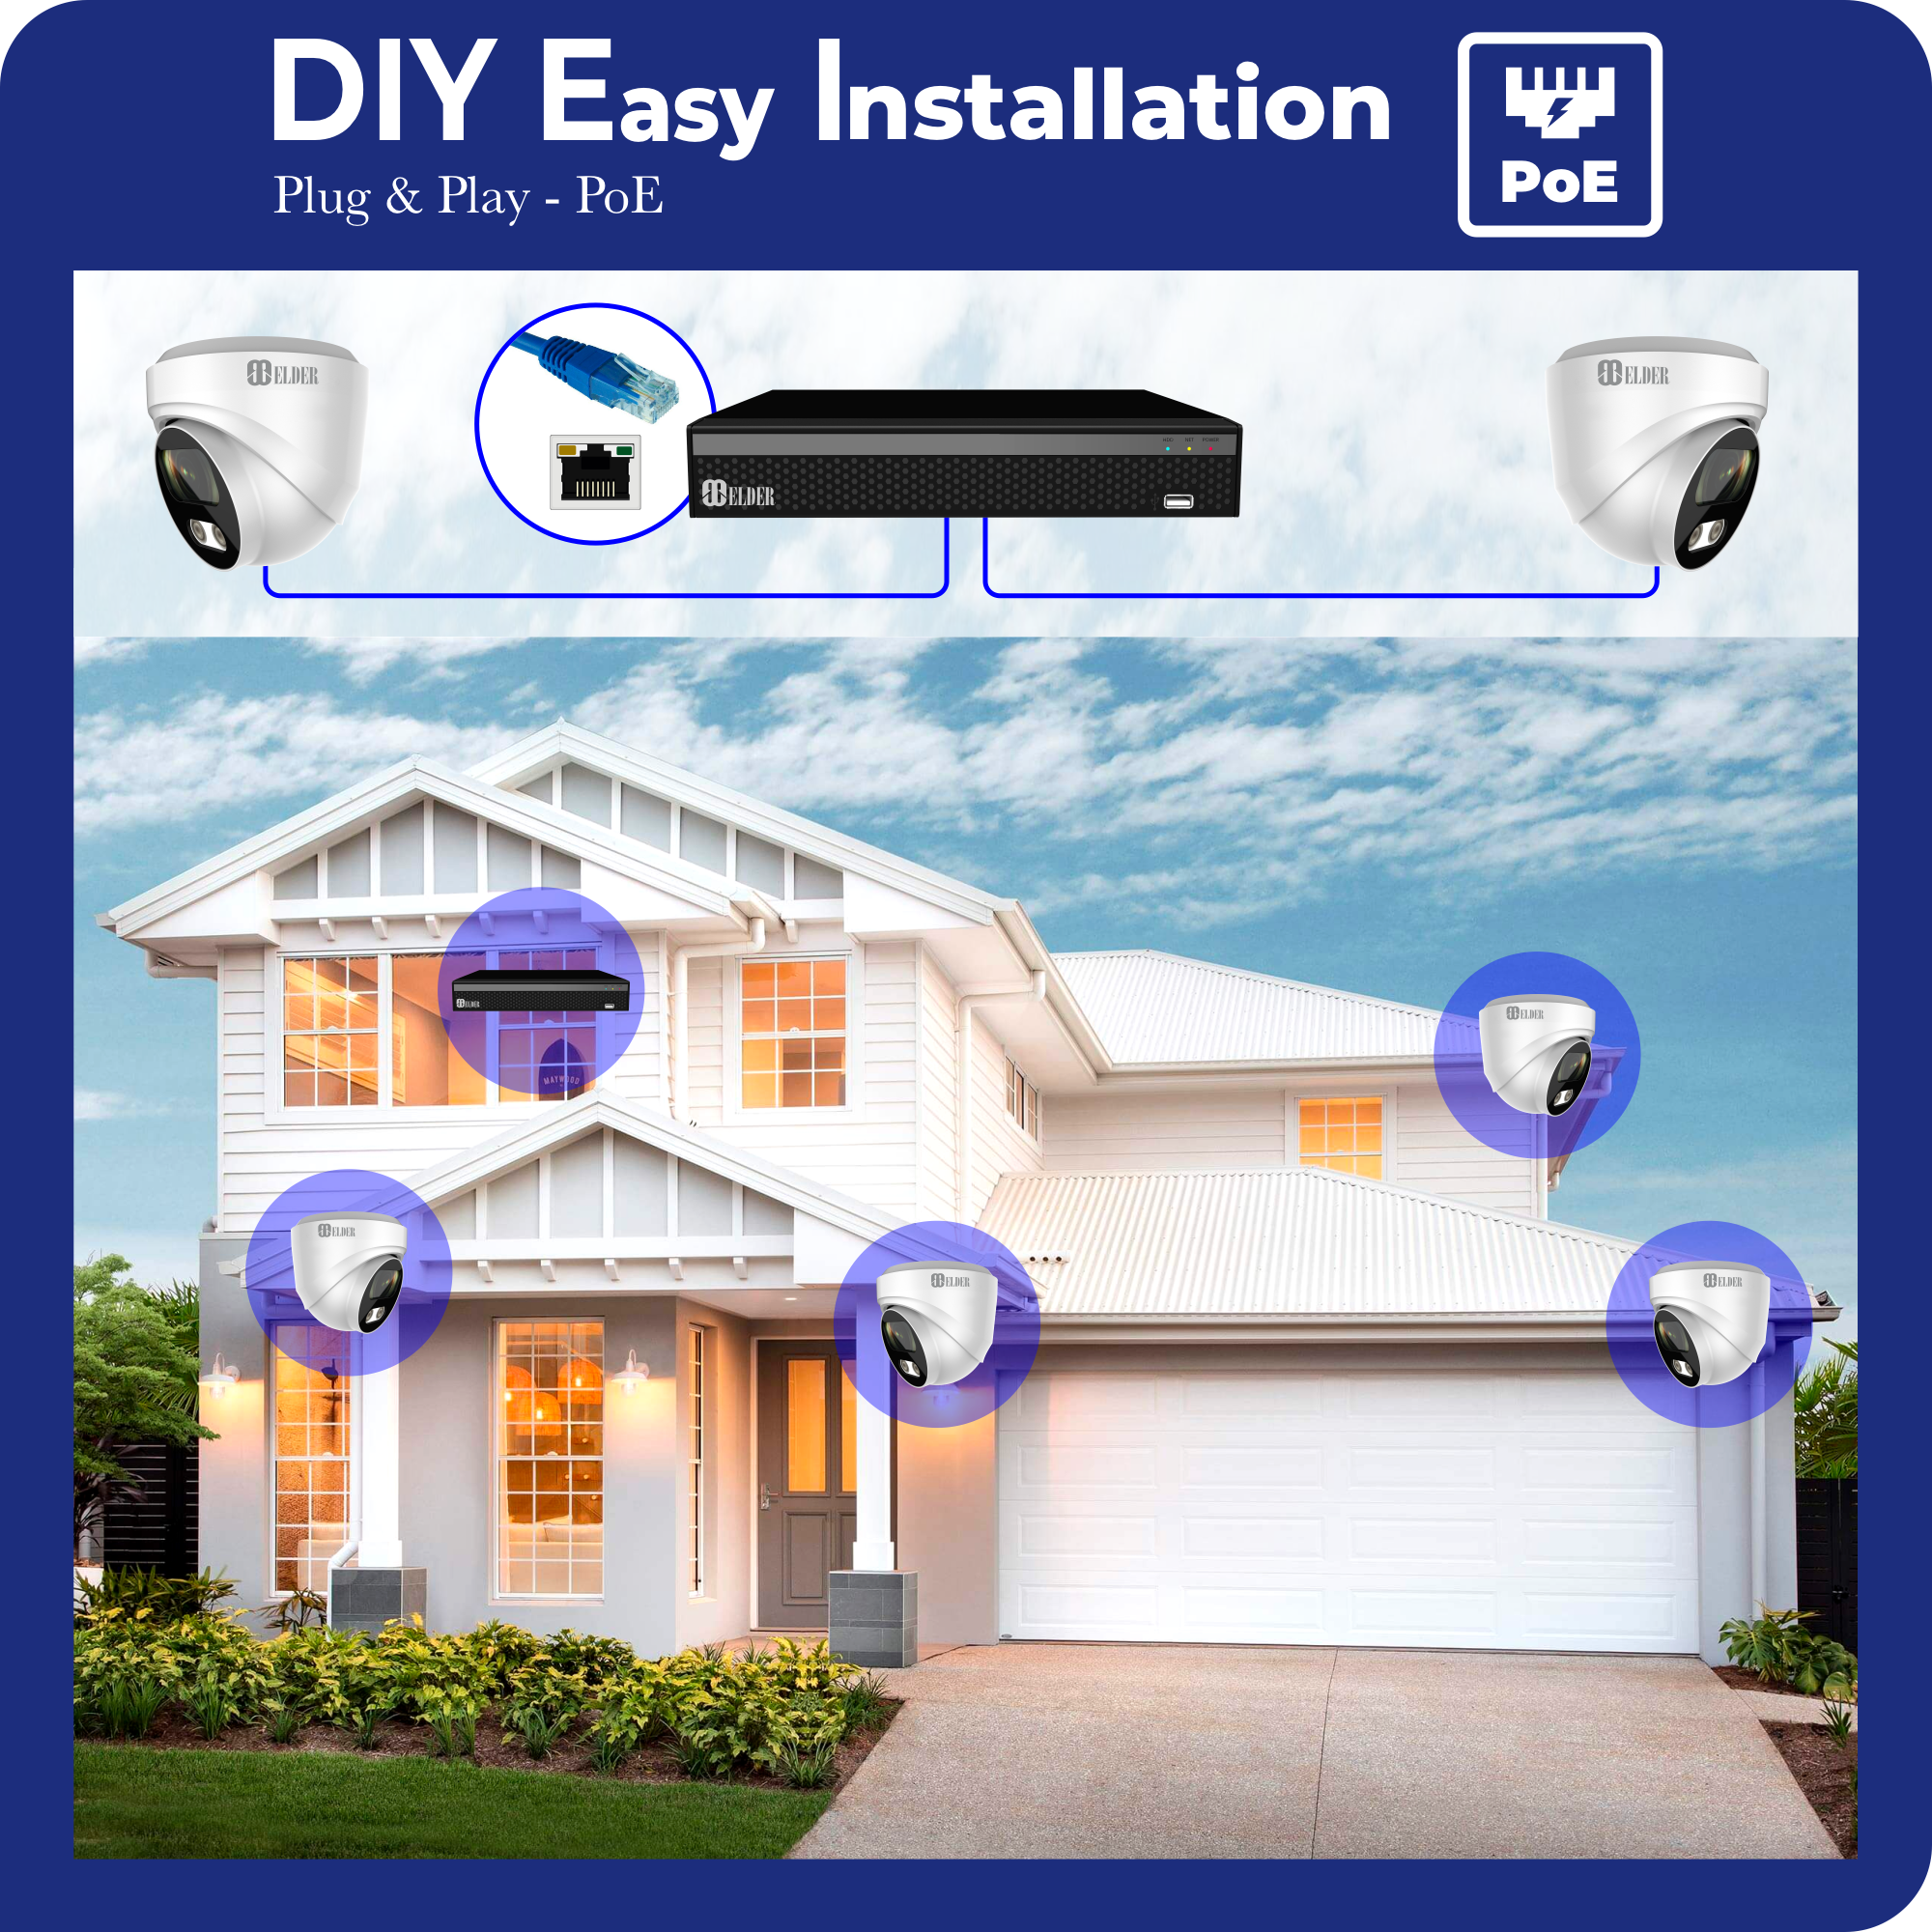 4K Security Camera System 8Ch PoE NVR Surveillance Kit Outdoor Wired DIY, Listen-in Audio, 4-Camera Dome Hunter-LE Series